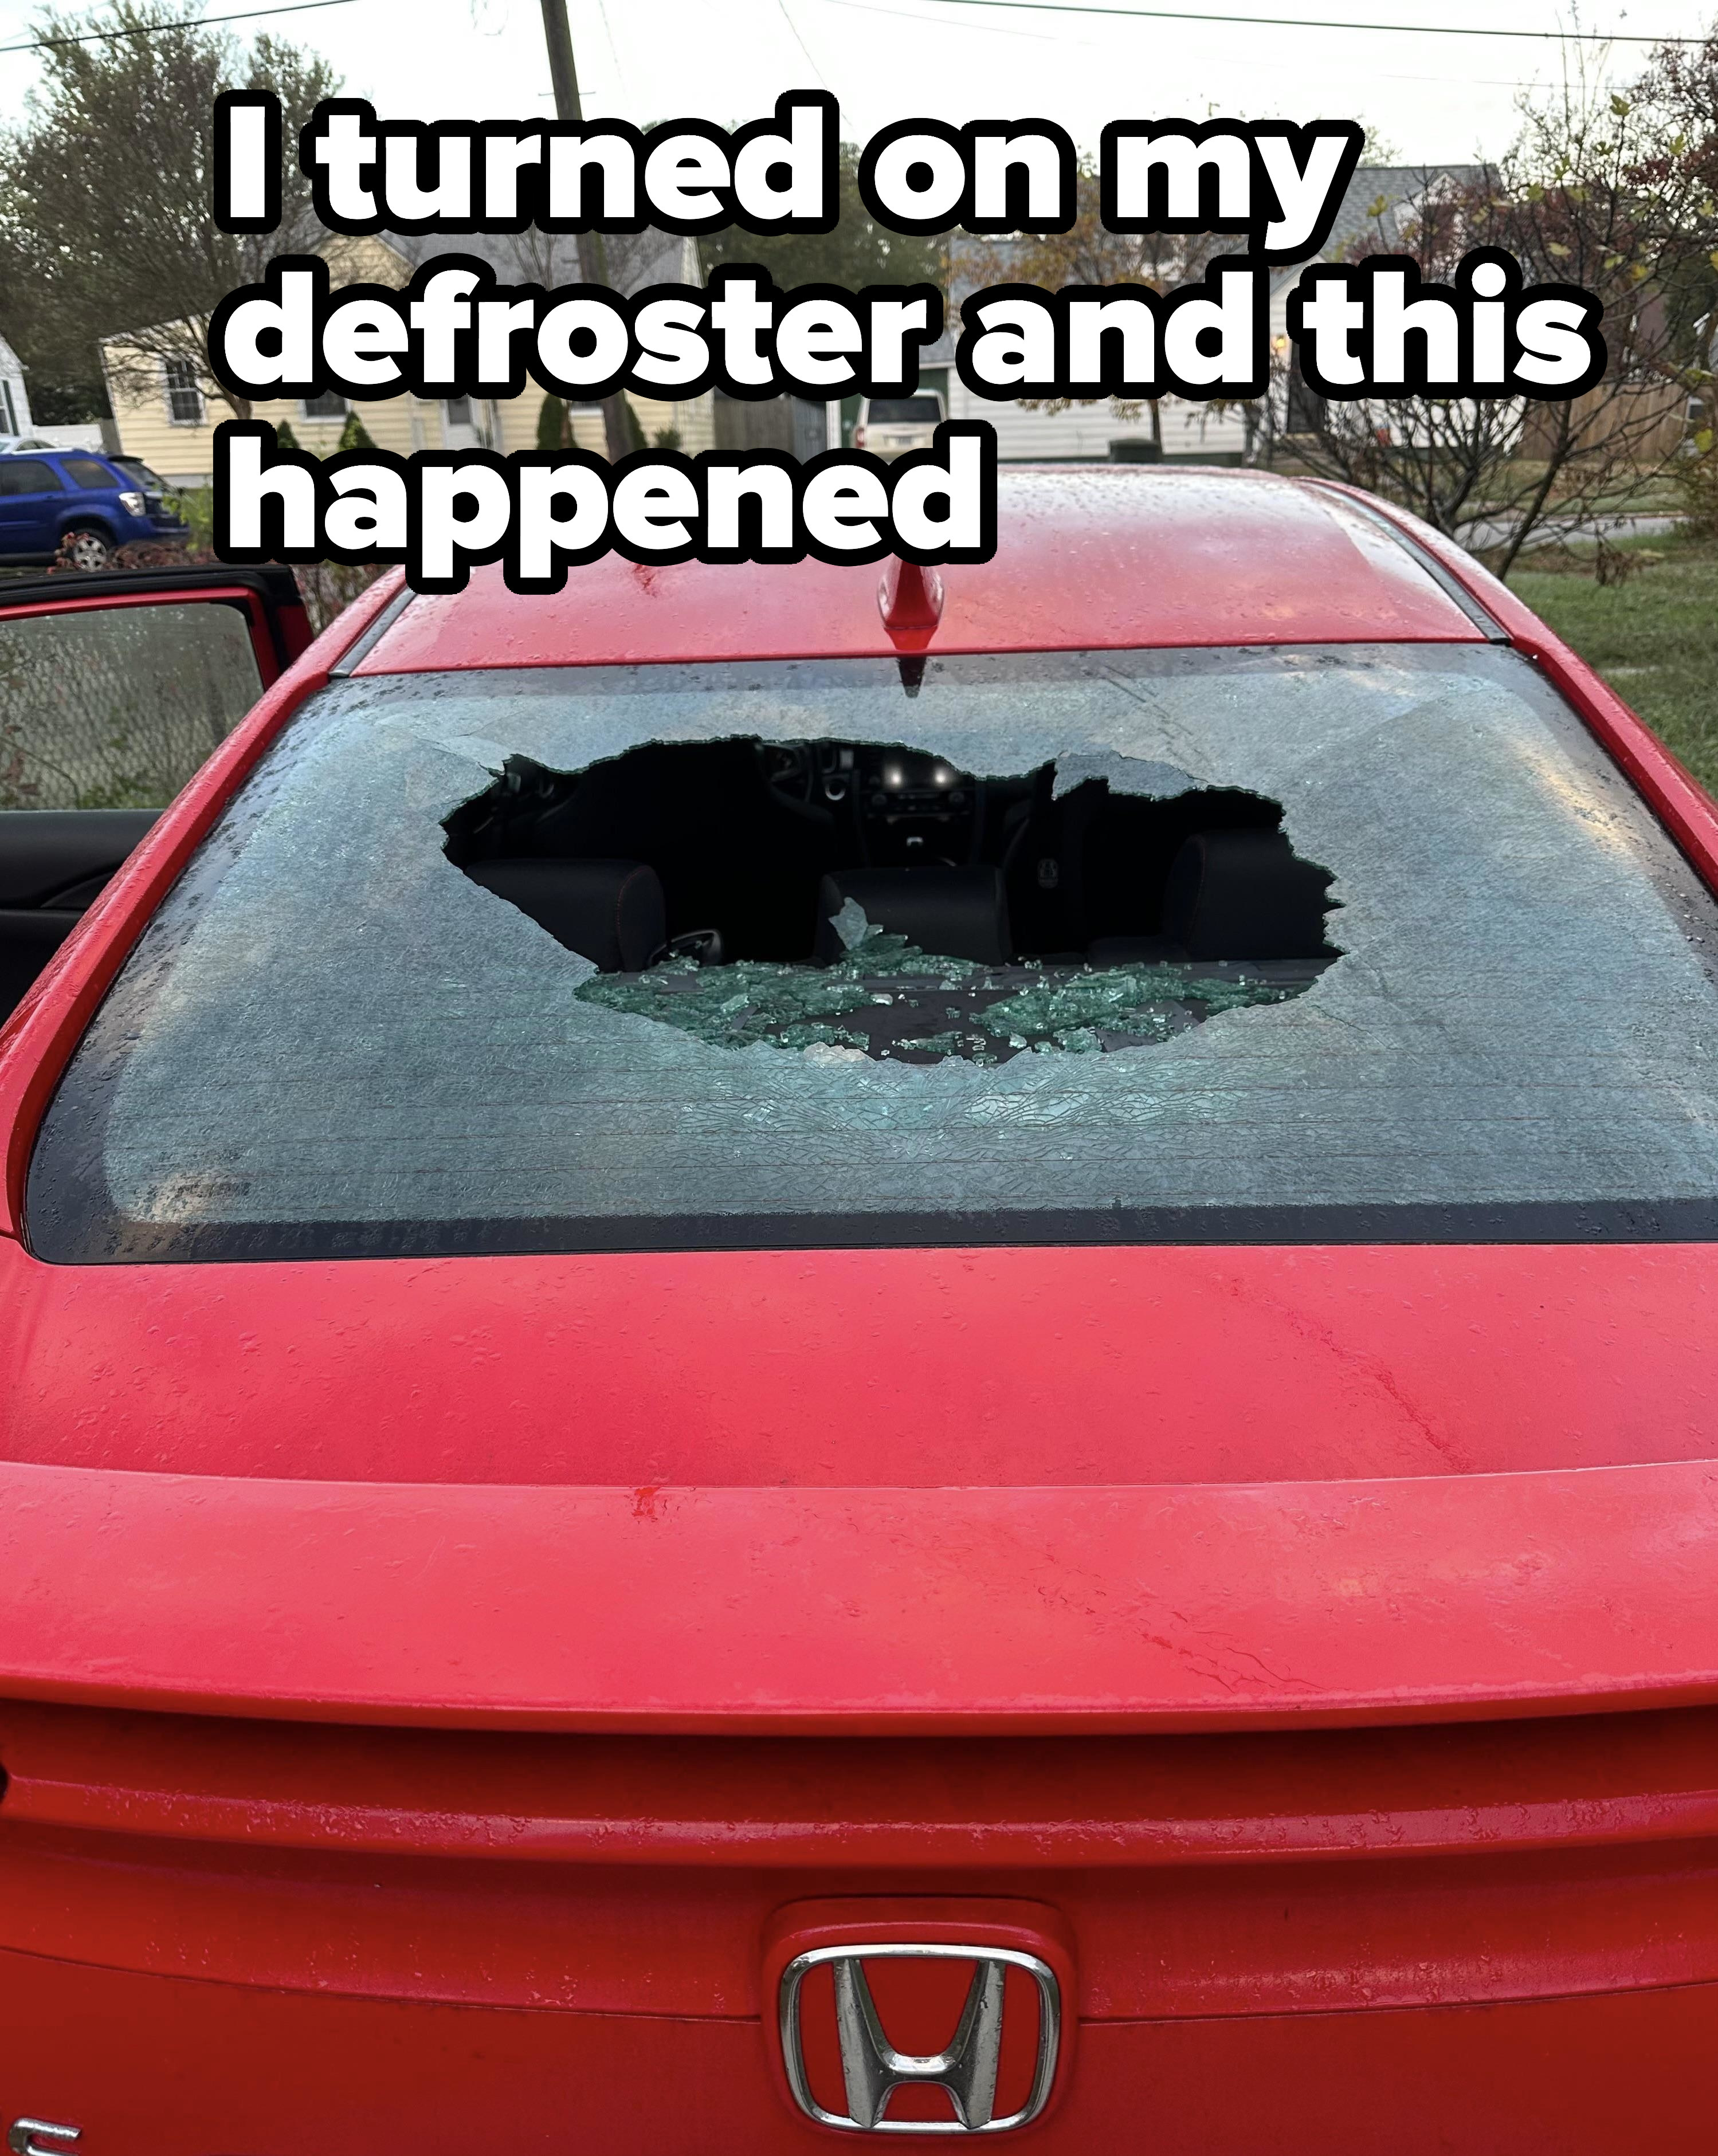 The shattered back window of a car